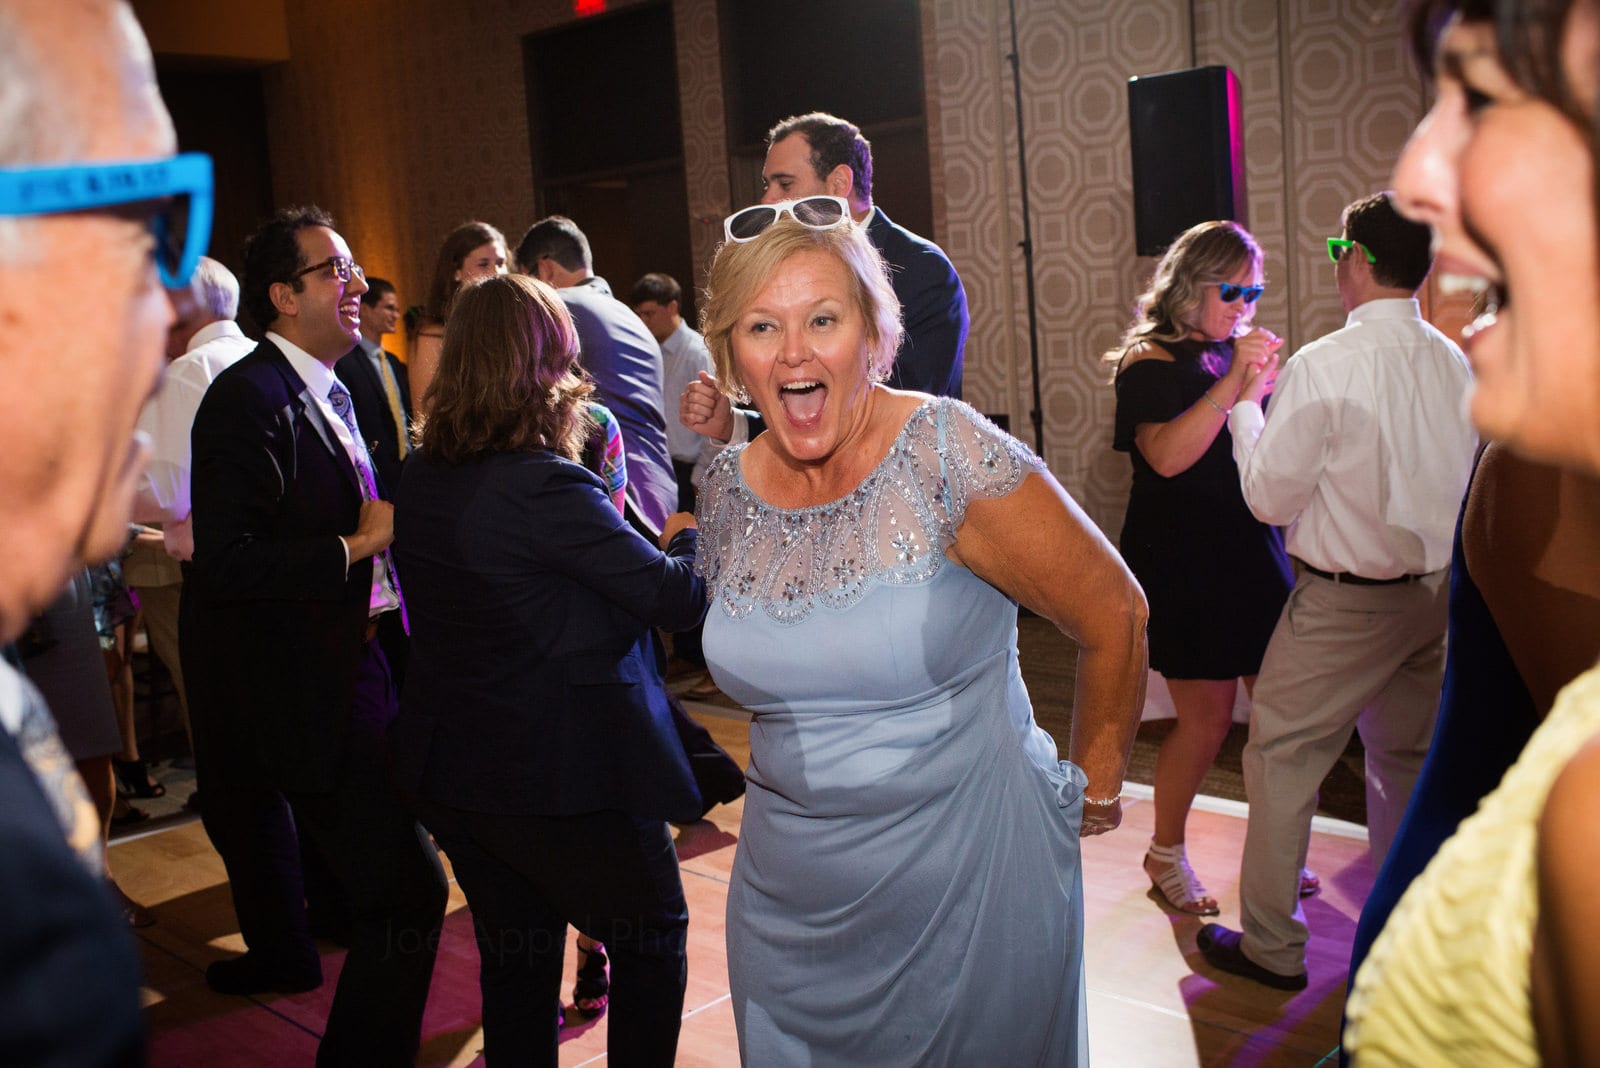 A mother of the bride laughs as she dances in her light blue dress during a Wedding Photography at Fairmont Hotel Pittsburgh.